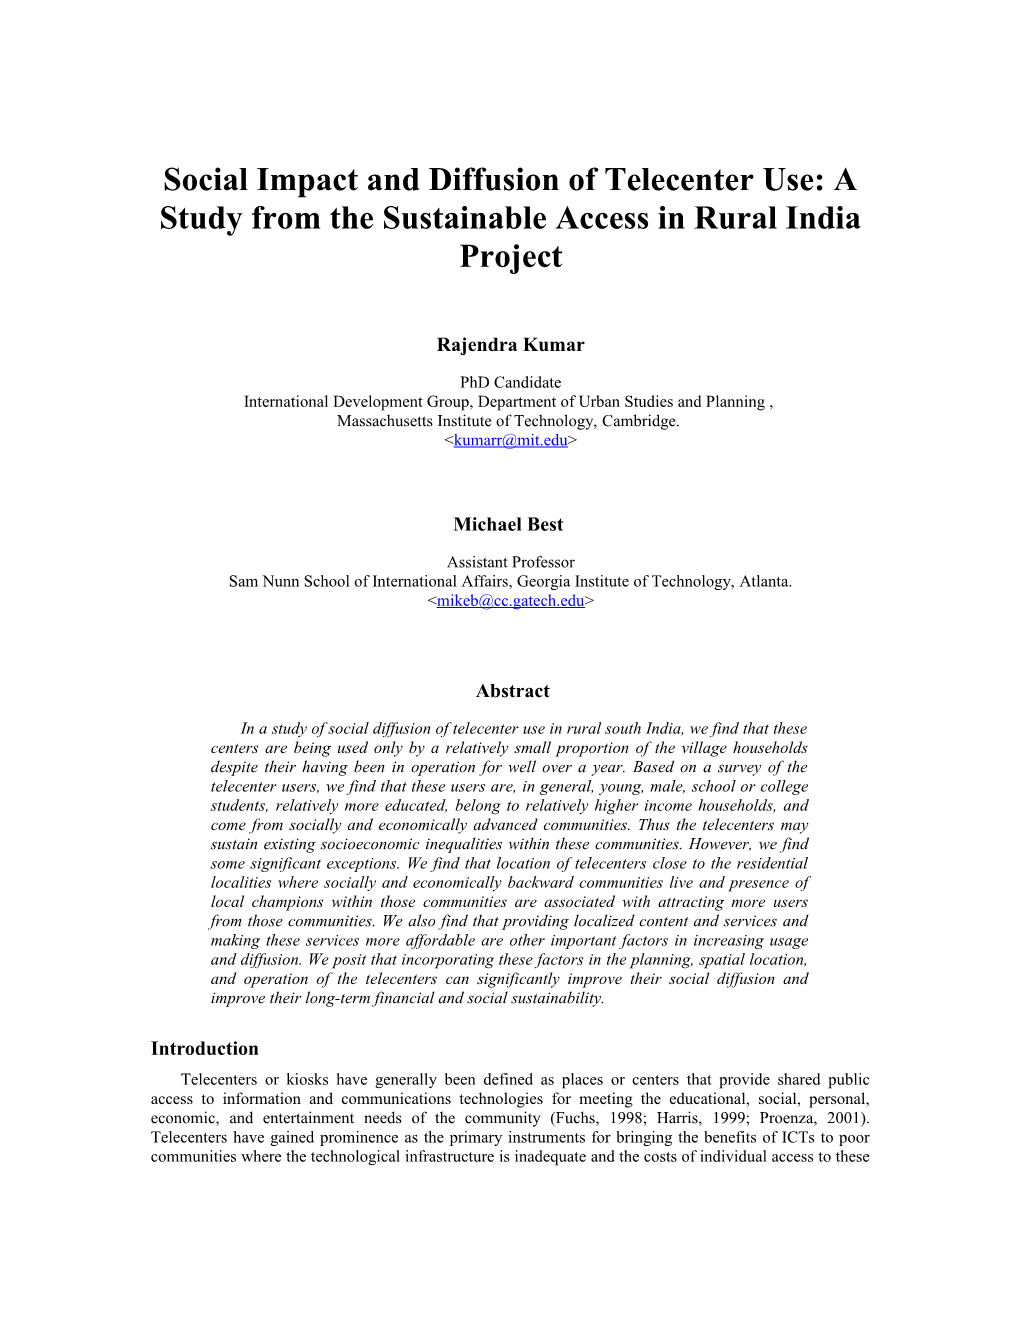 Searching for the Role of Icts in Development: a Case Study of a Rural Multi-Purpose Community